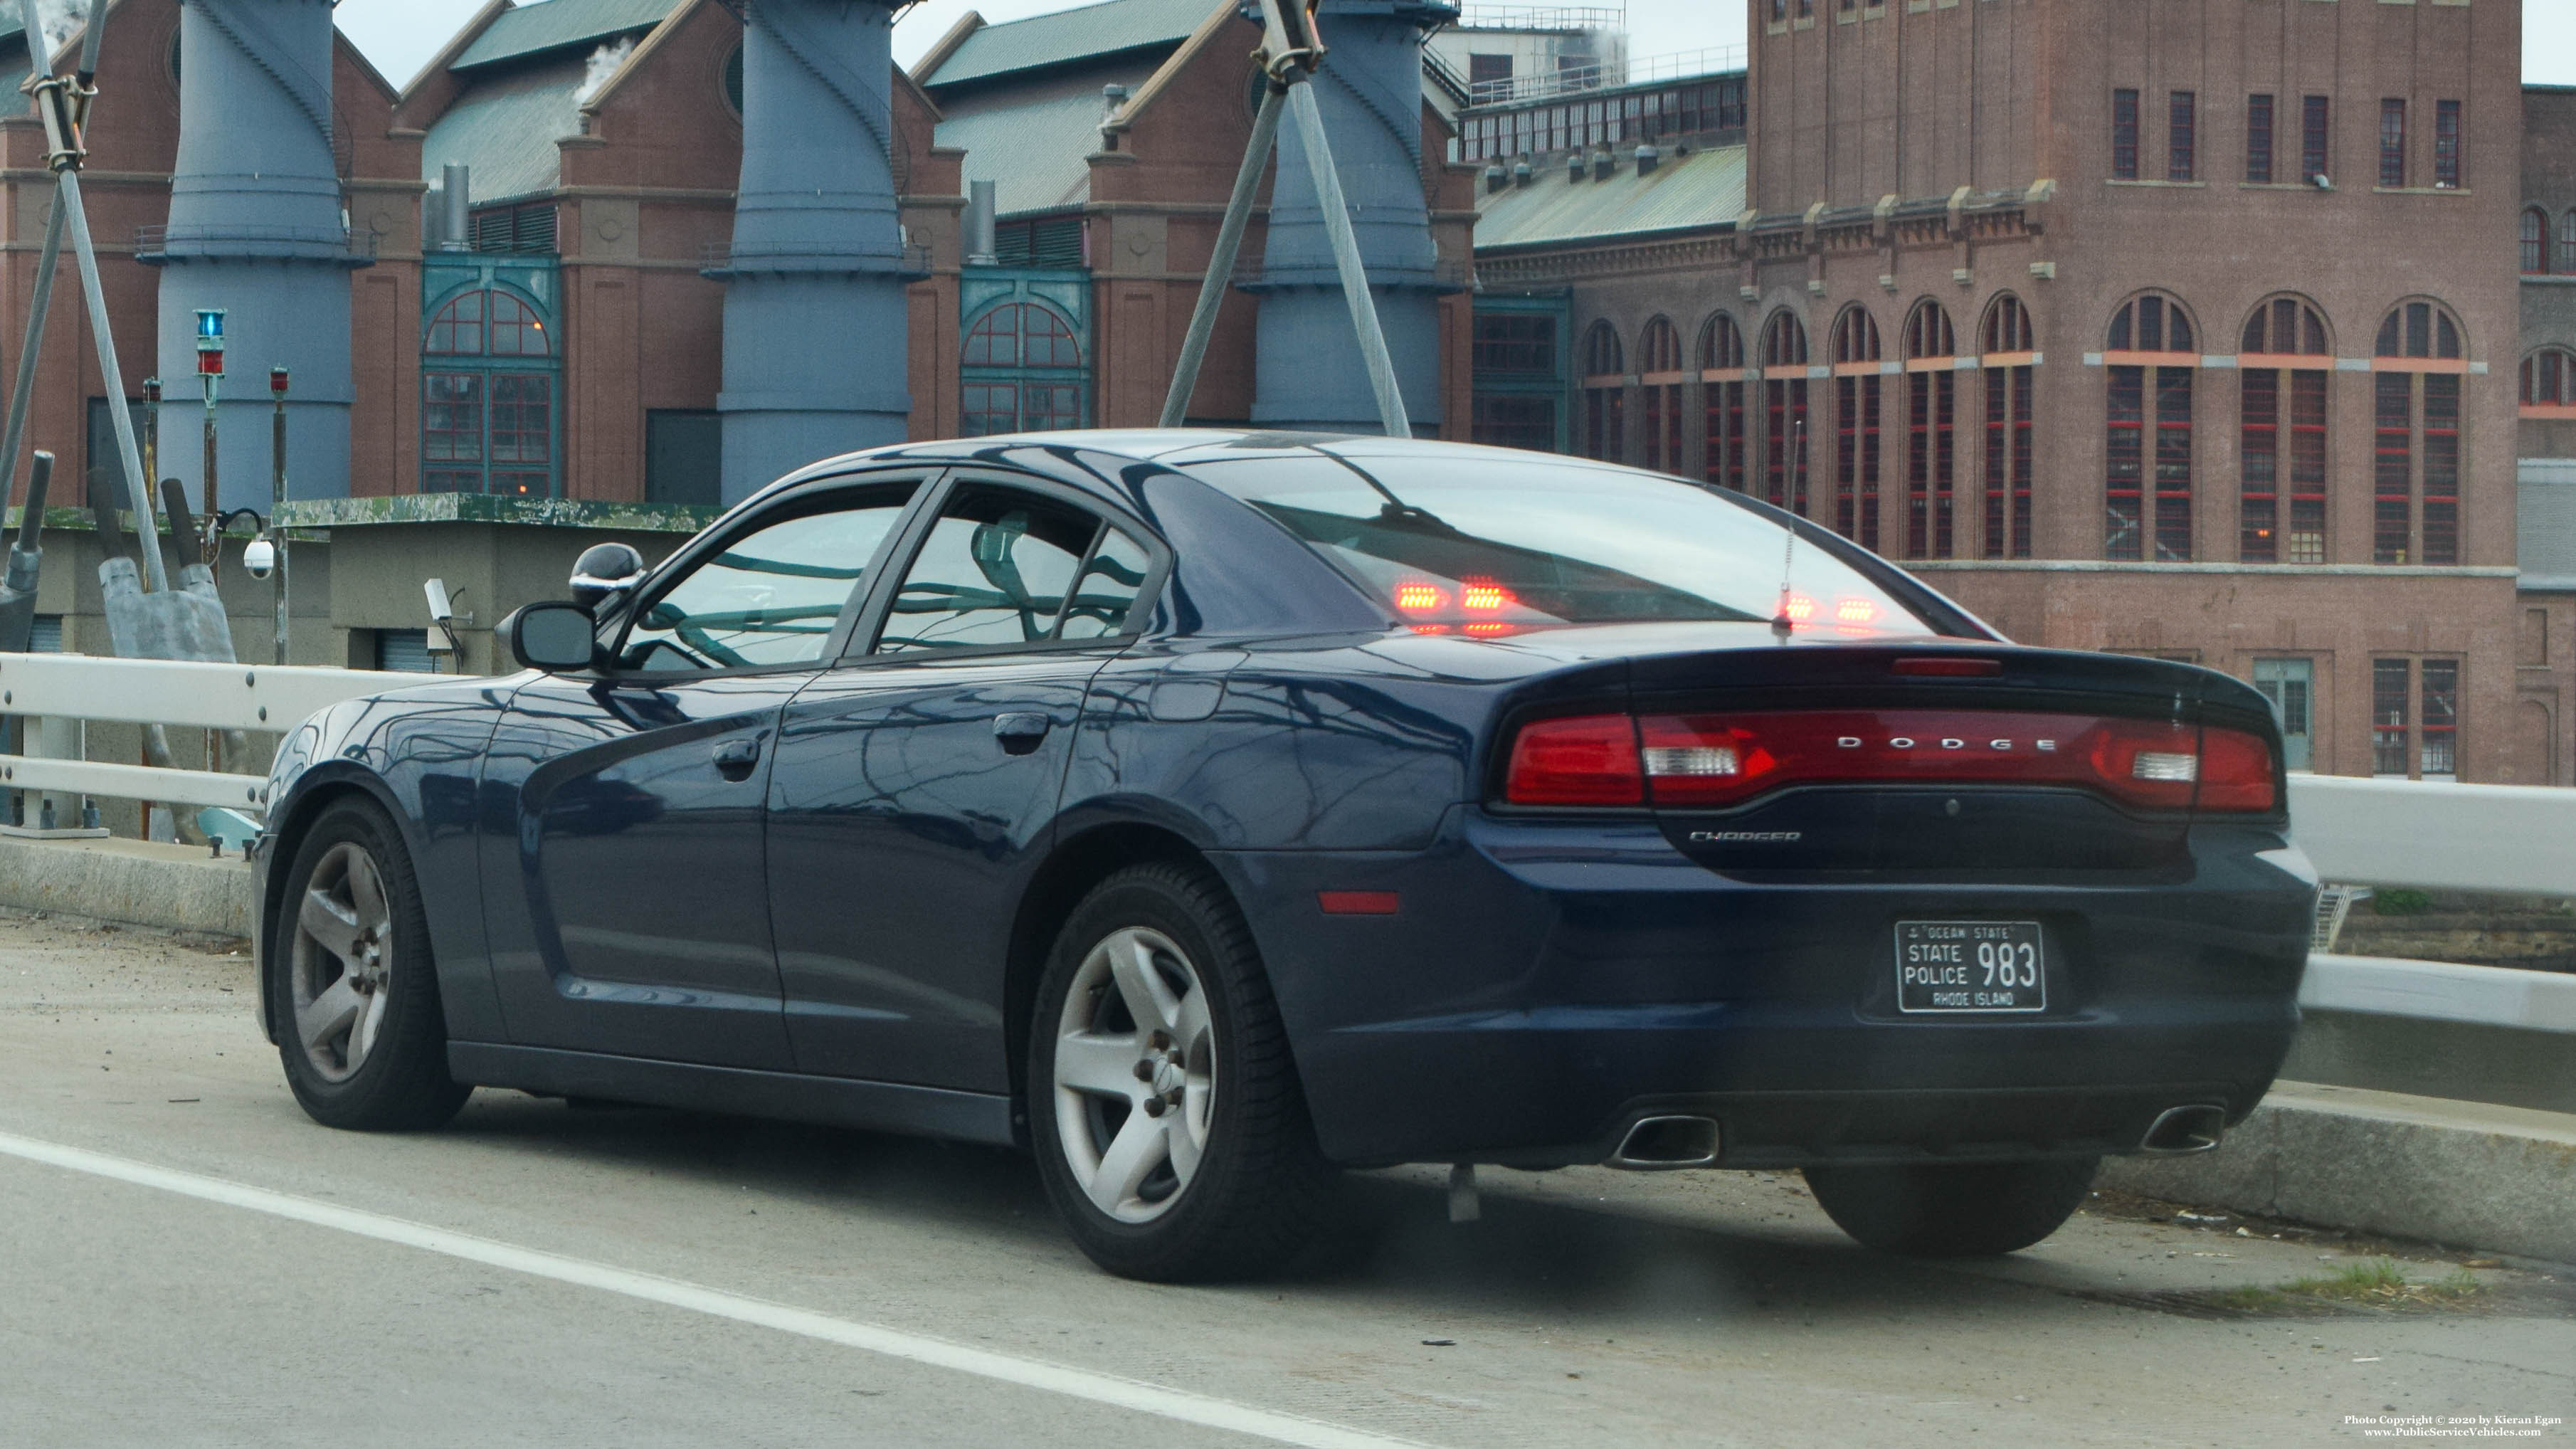 A photo  of Rhode Island State Police
            Cruiser 983, a 2013 Dodge Charger             taken by Kieran Egan